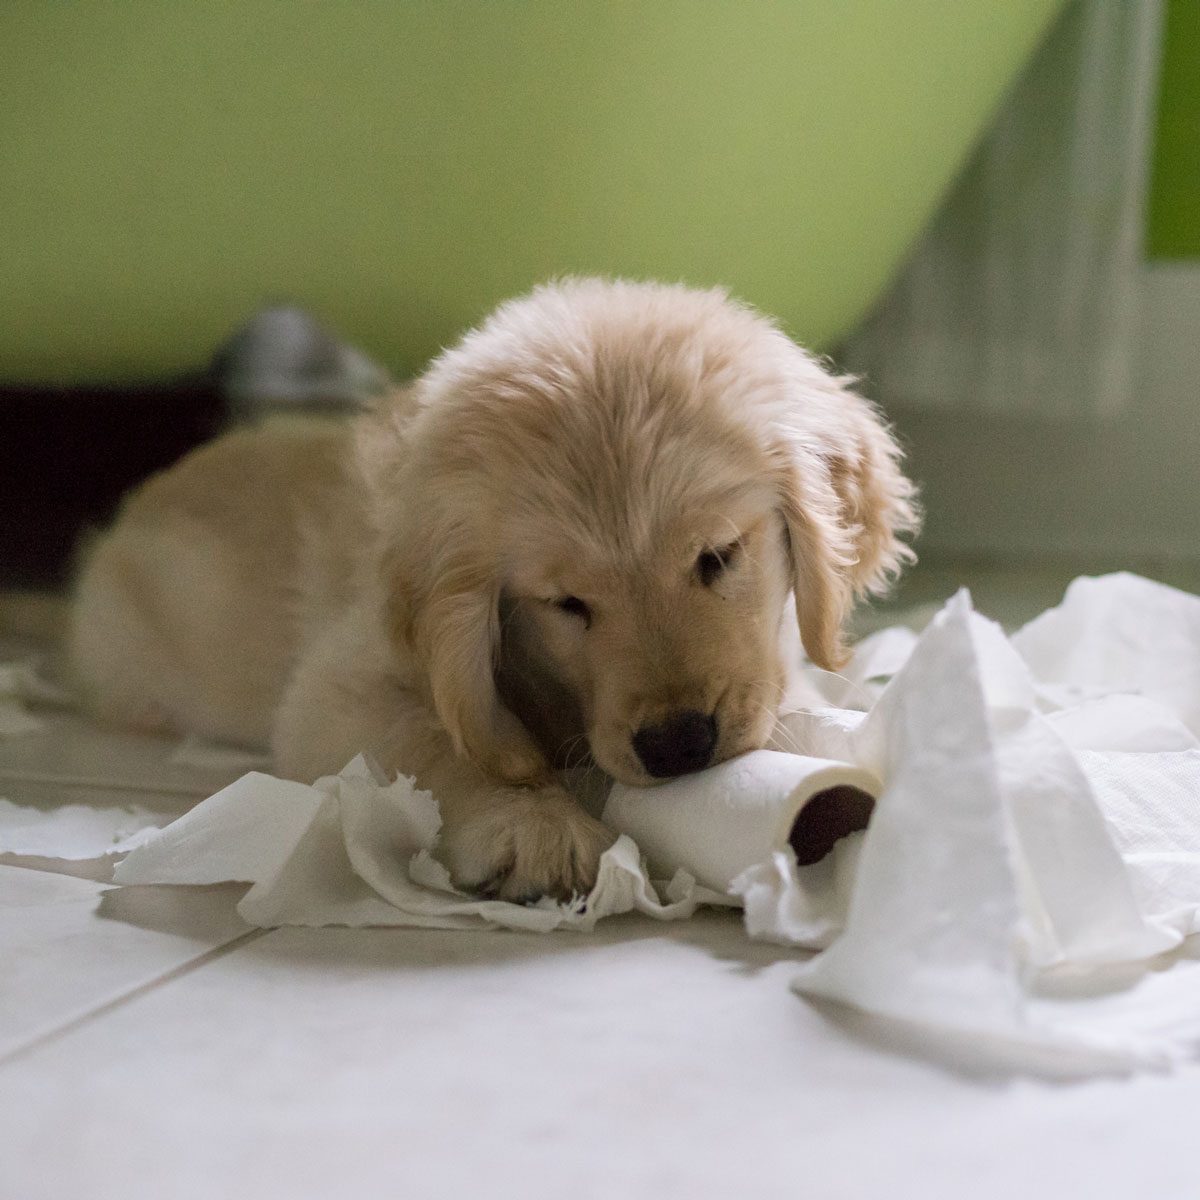 12 Ways To Puppy Proof Your House – Puppy Proofing Checklist